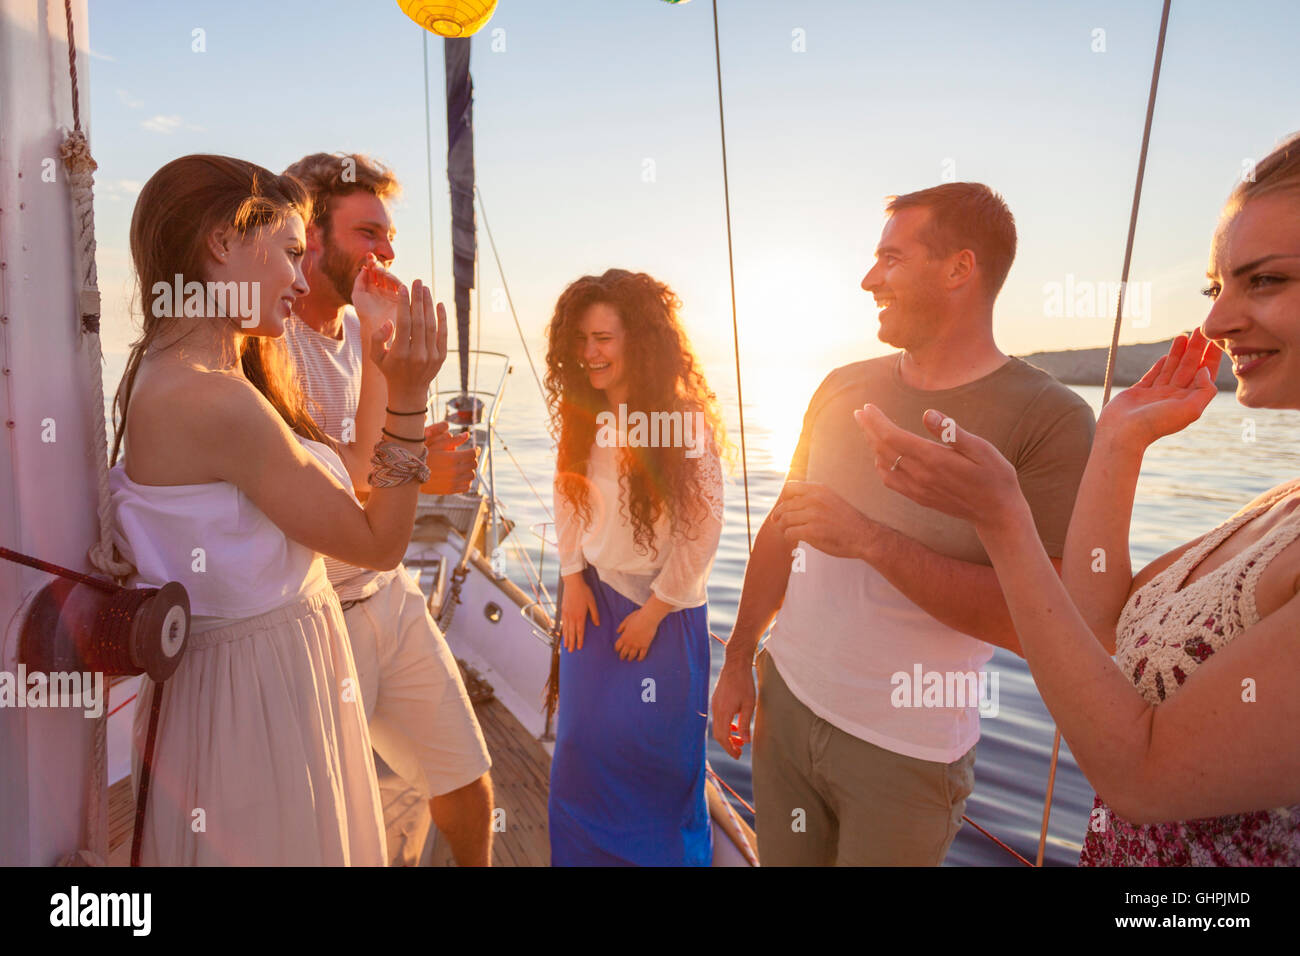 Friends celebrating and laughing on sailboat Stock Photo